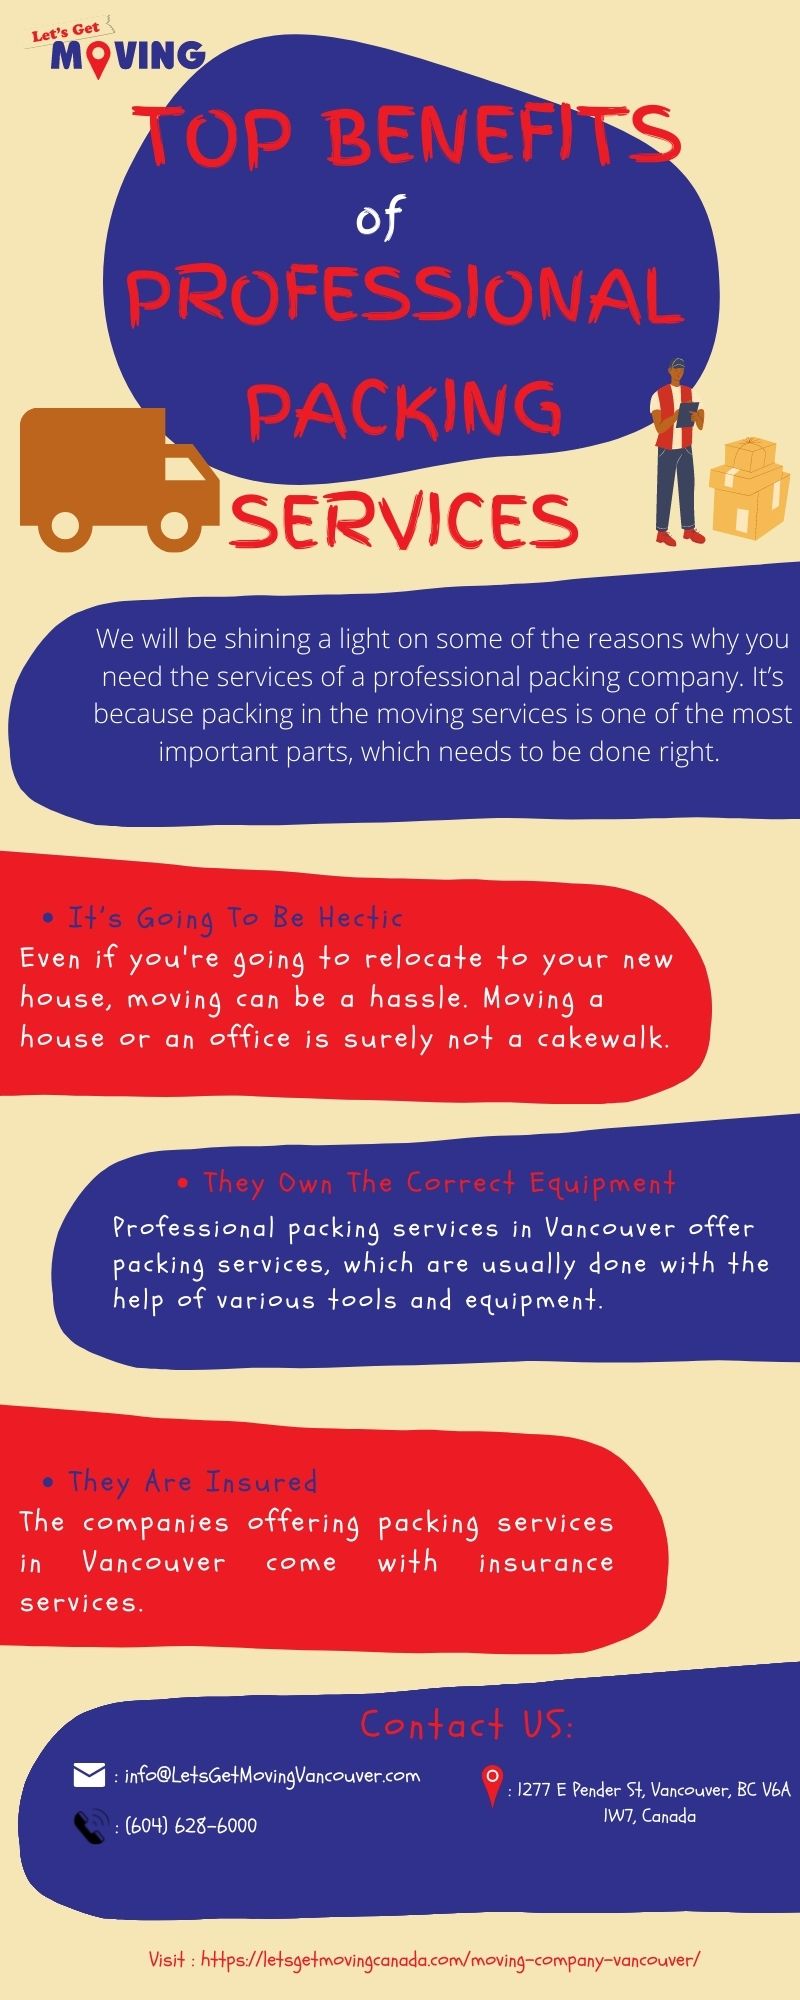 Top Benefits of Professional Packing Services by LetGetsMovin...